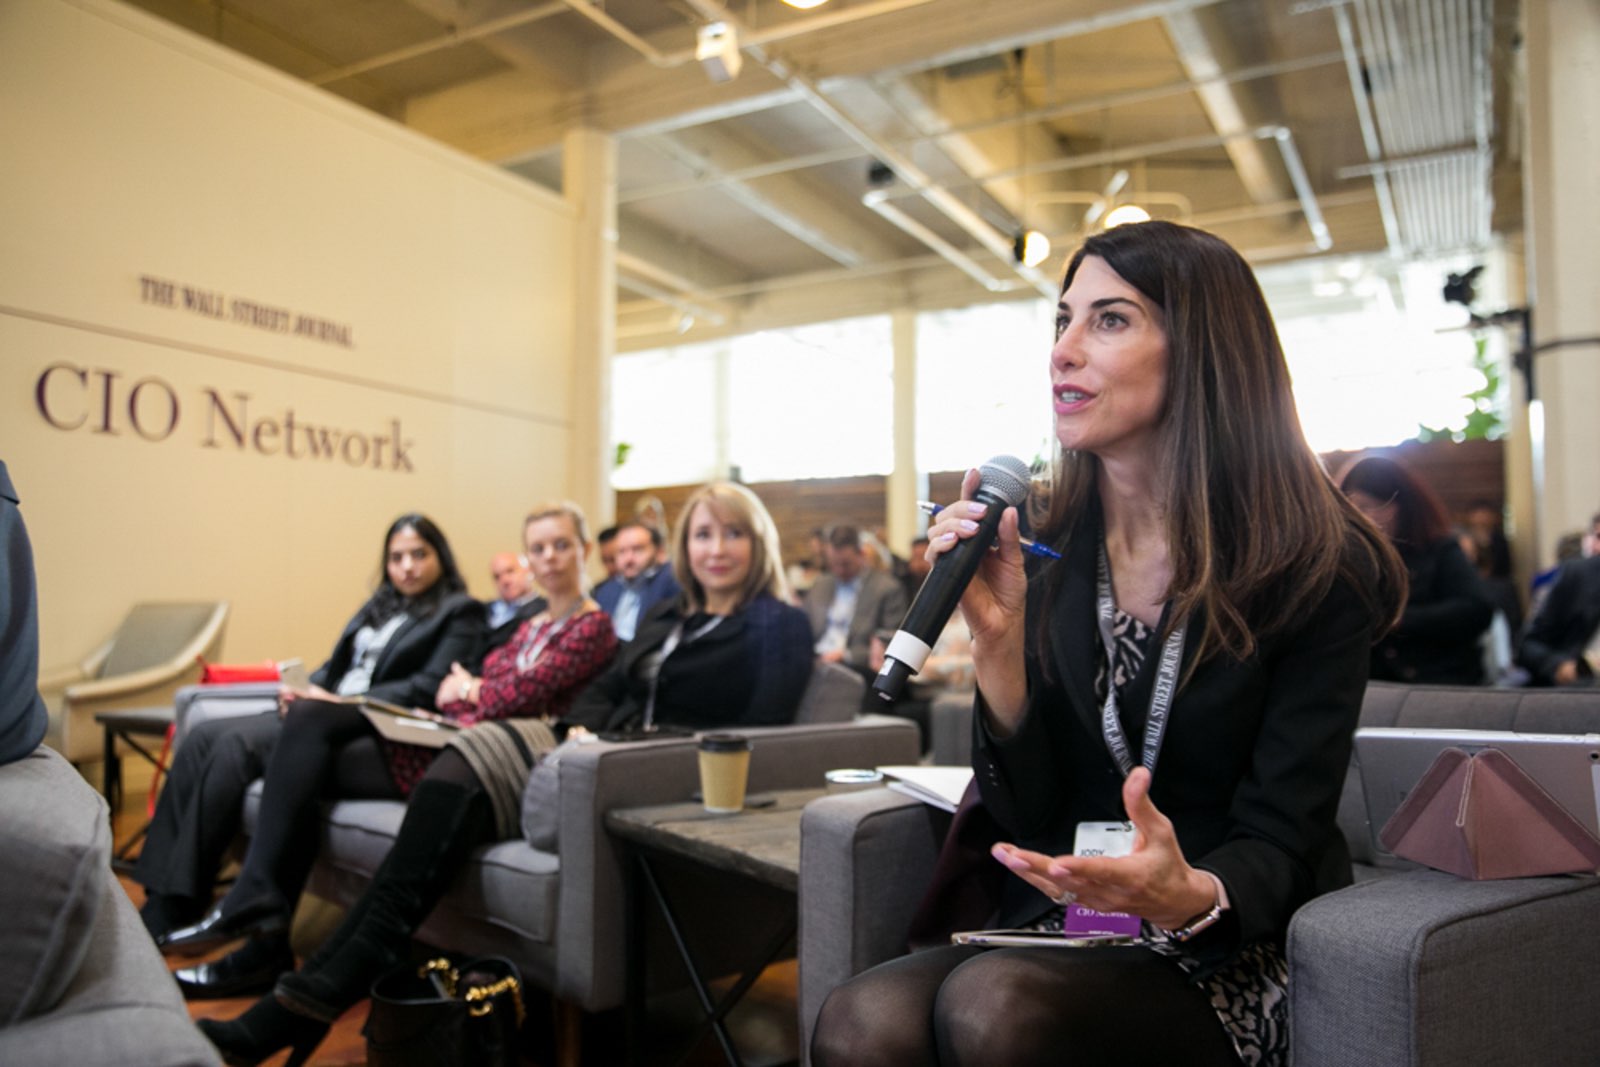 woman-speaking-at-wsj-cio-network-conference Conference